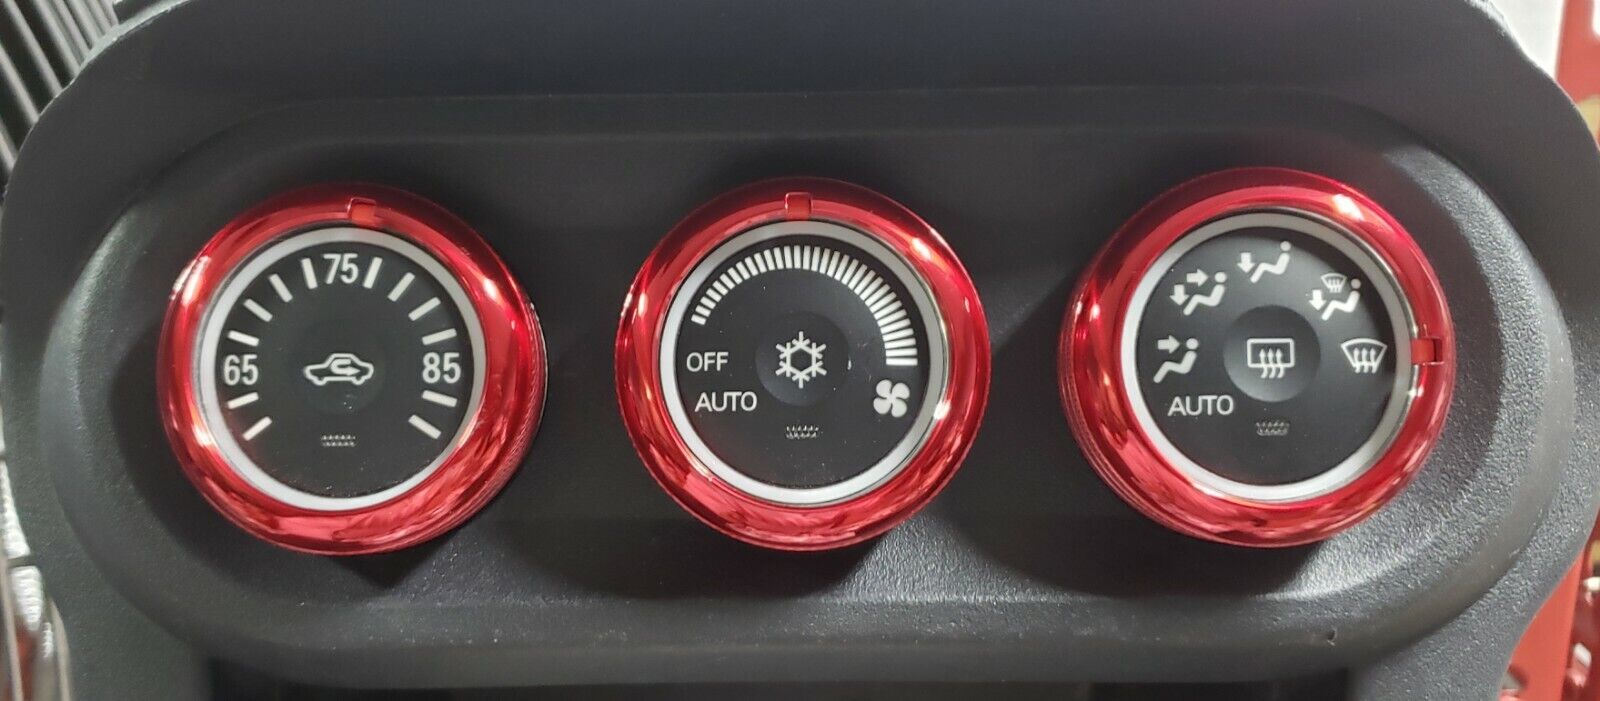 SSCO CANDY RED 08+ EVO X CLIMATE CONTROL COVERS LANCER MR EVOLUTION MITSUBISHI